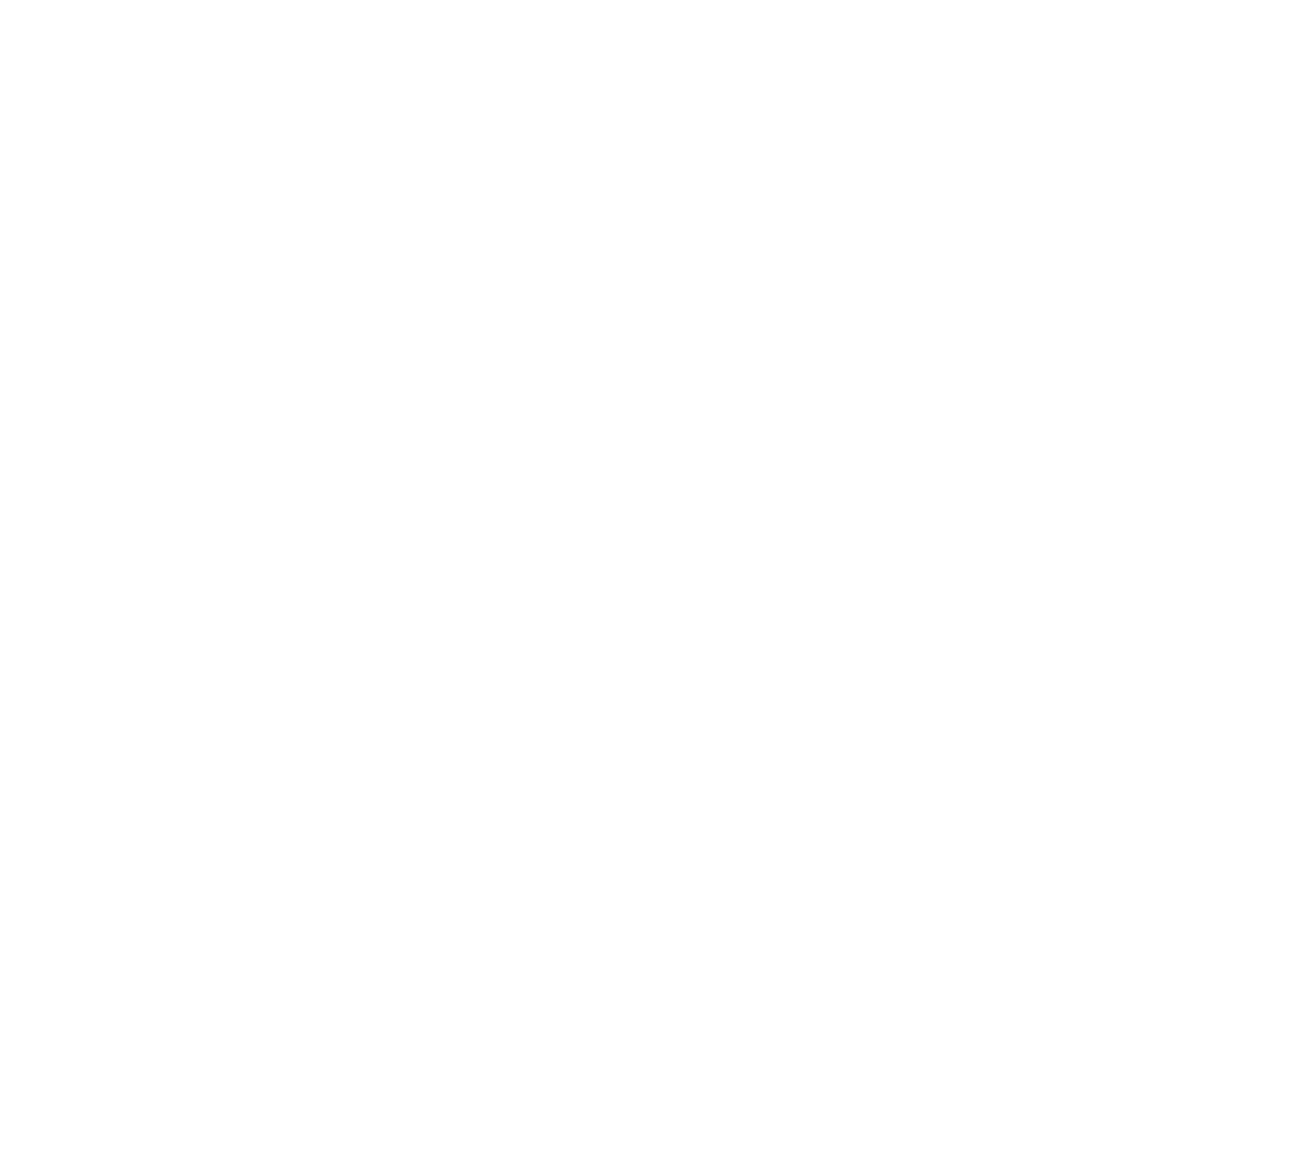 A modern take on the `Iwa bird incorporating the Mauna to represent our organizations purpose and values.